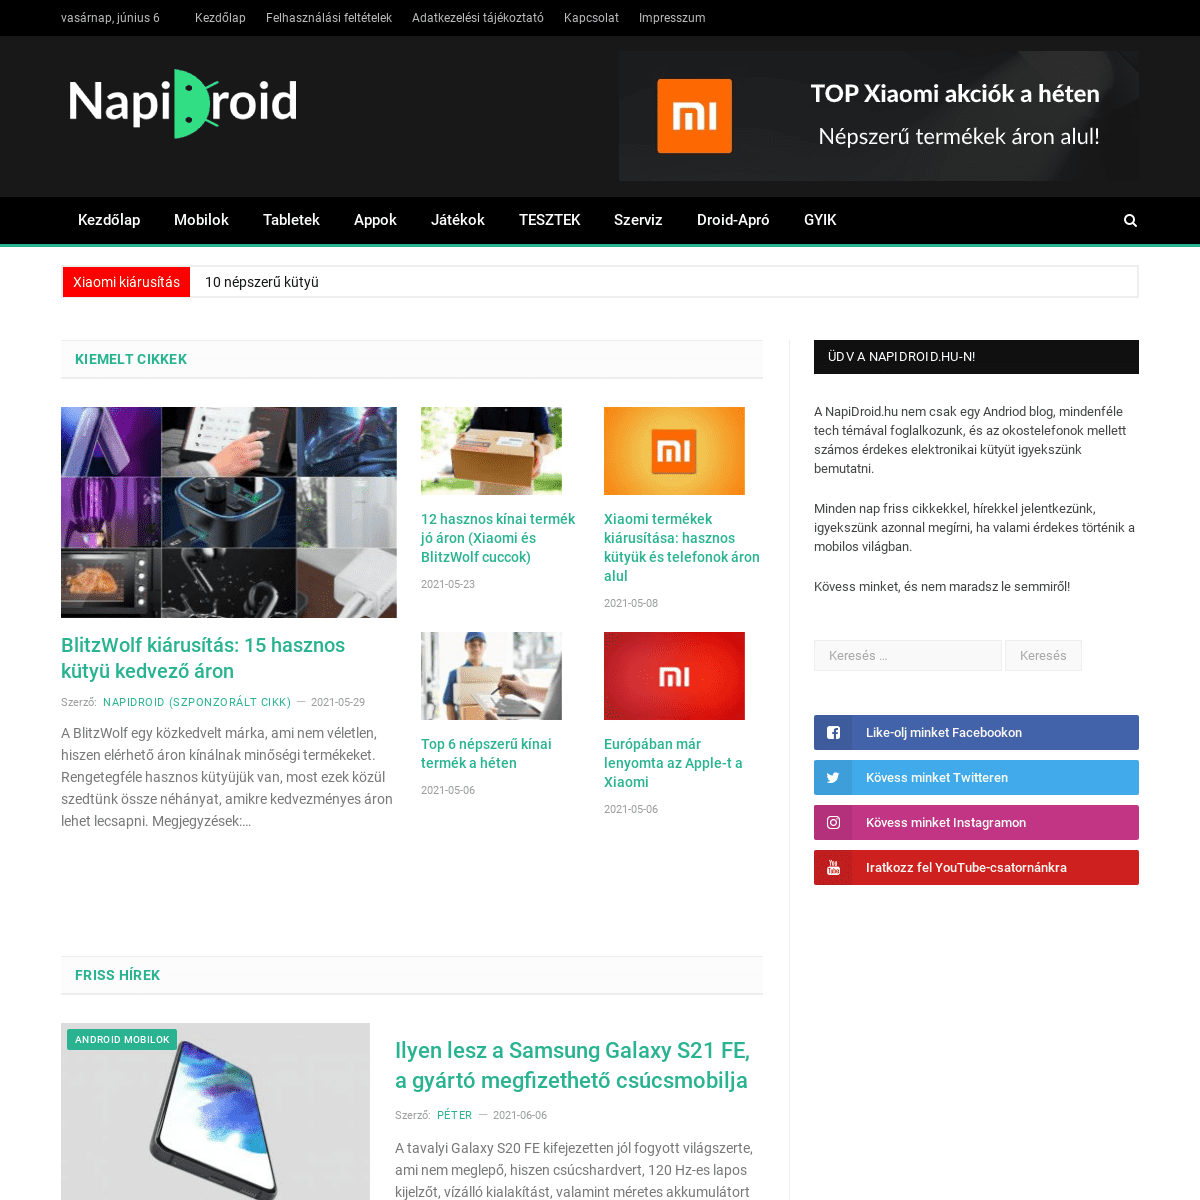 A complete backup of https://napidroid.hu